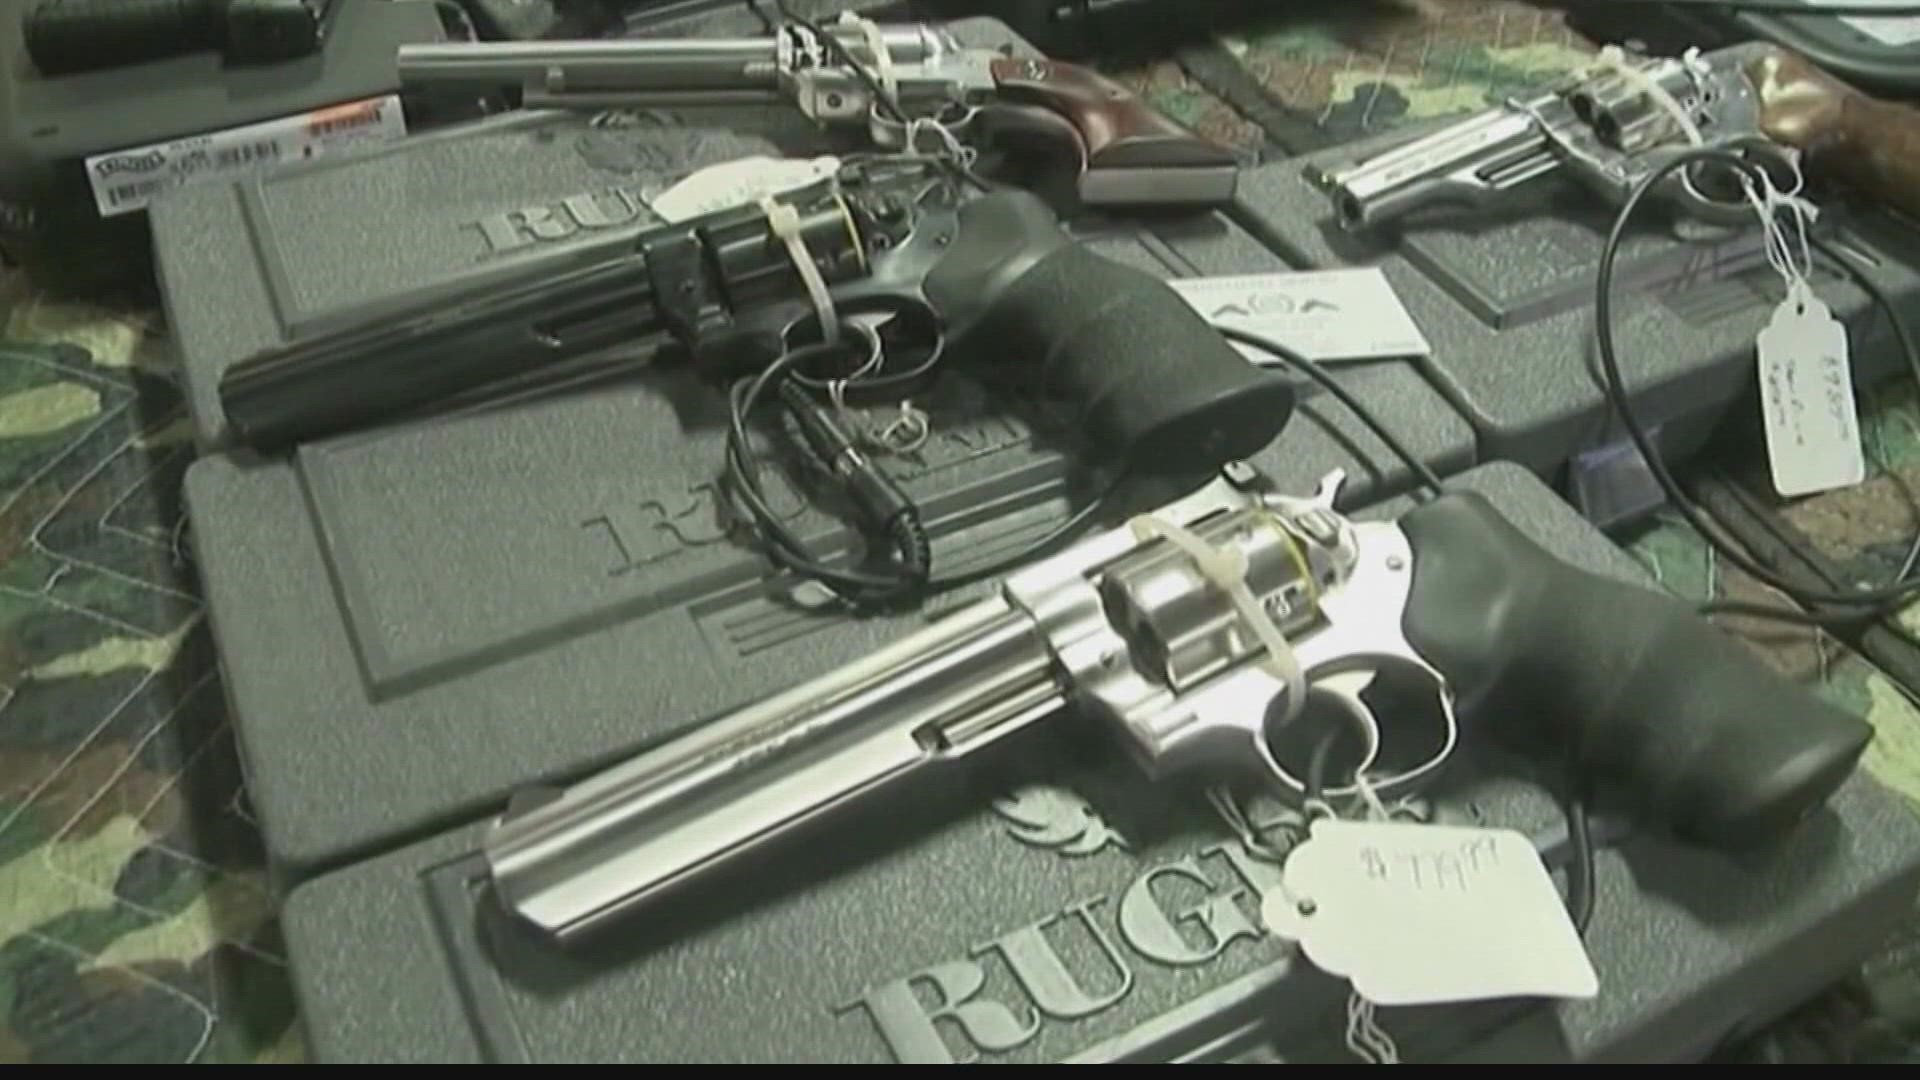 At the Statehouse, there's a renewed push from Indiana Senate Republicans to eliminate the need for gun permits.